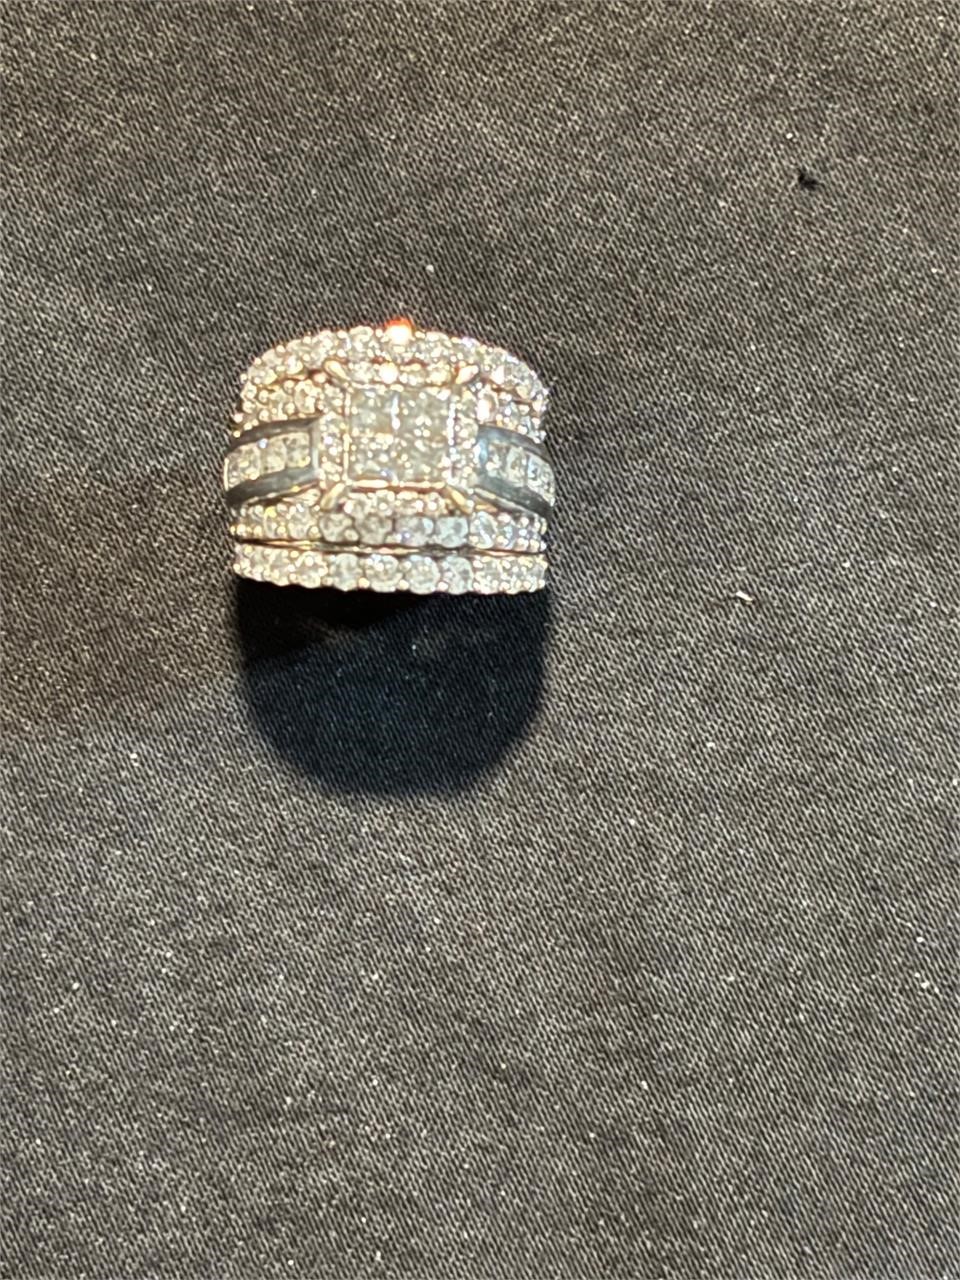 OVER 4 CARATS of diamonds this is a beautiful ring